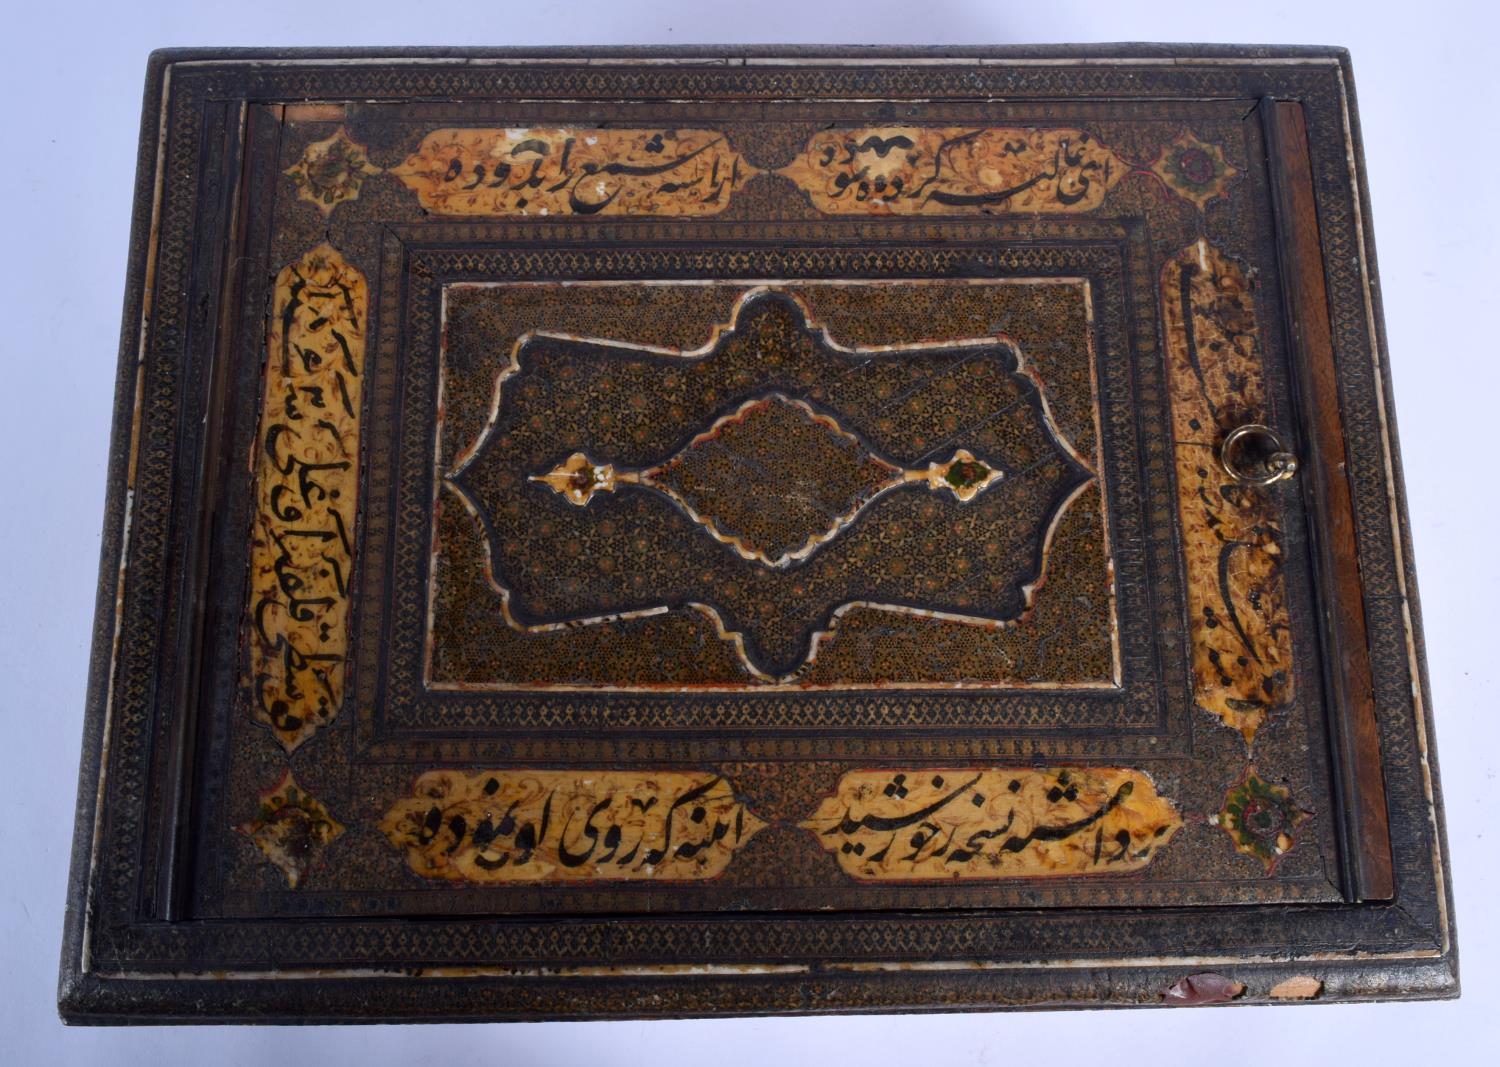 A RARE LARGE 18TH/19TH CENTURY MIDDLE EASTERN ISLAMIC MICRO MOSAIC BOX painted with Kufic script, fo - Image 3 of 8